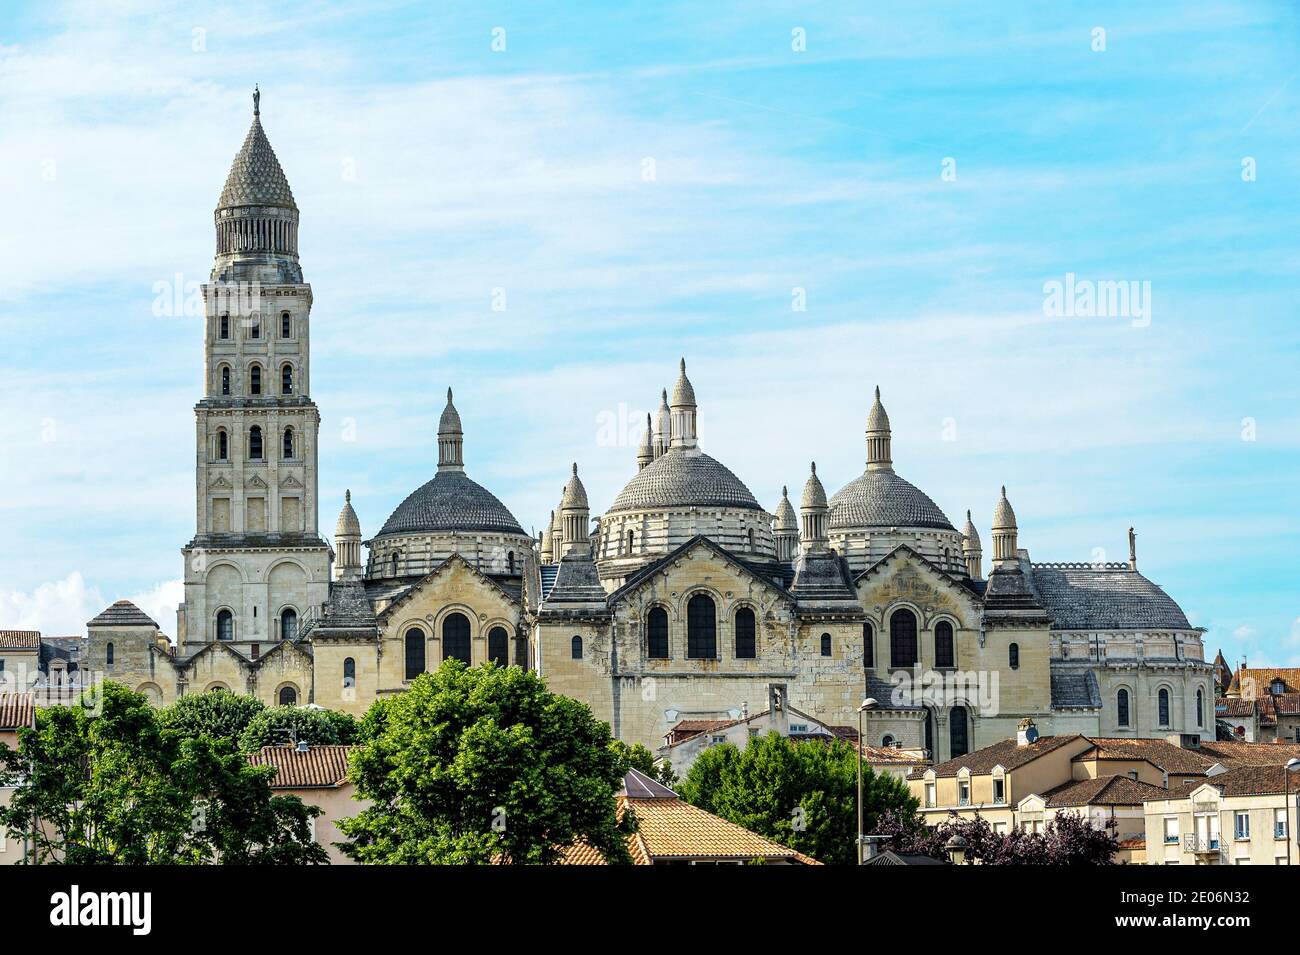 The roman catholic cathedral of Périgueux, in the Périgord region of France. A profusion of domes covered with gray lead plates. Stock Photo